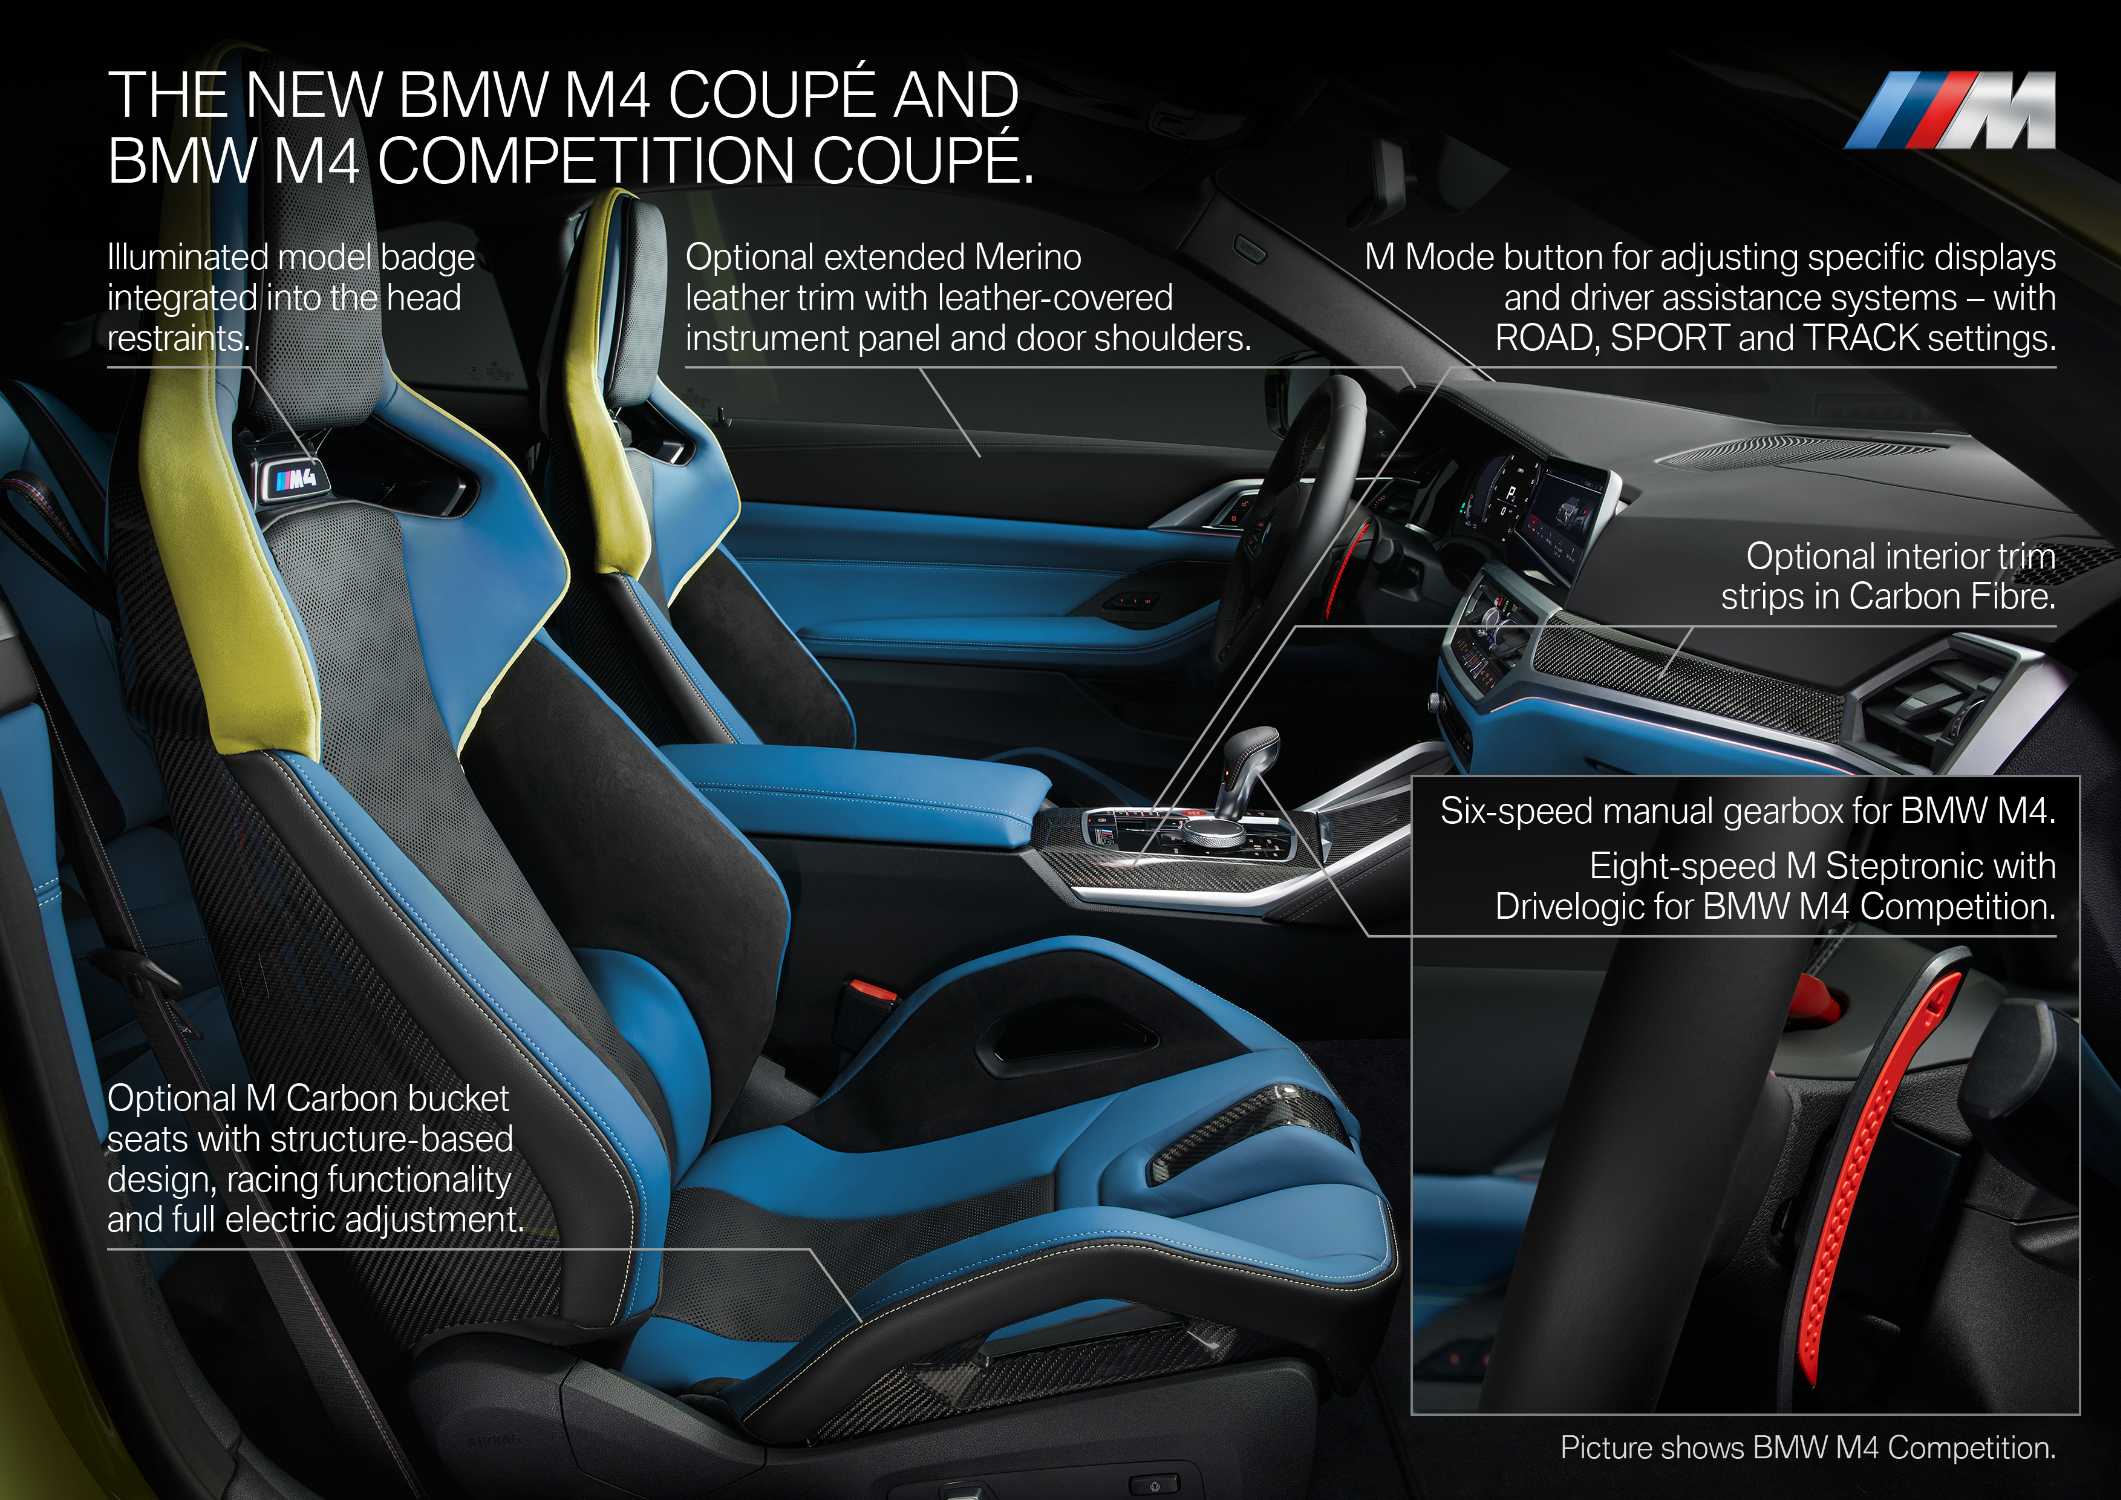 The new BMW M4 Competition Coupé (09/2020).